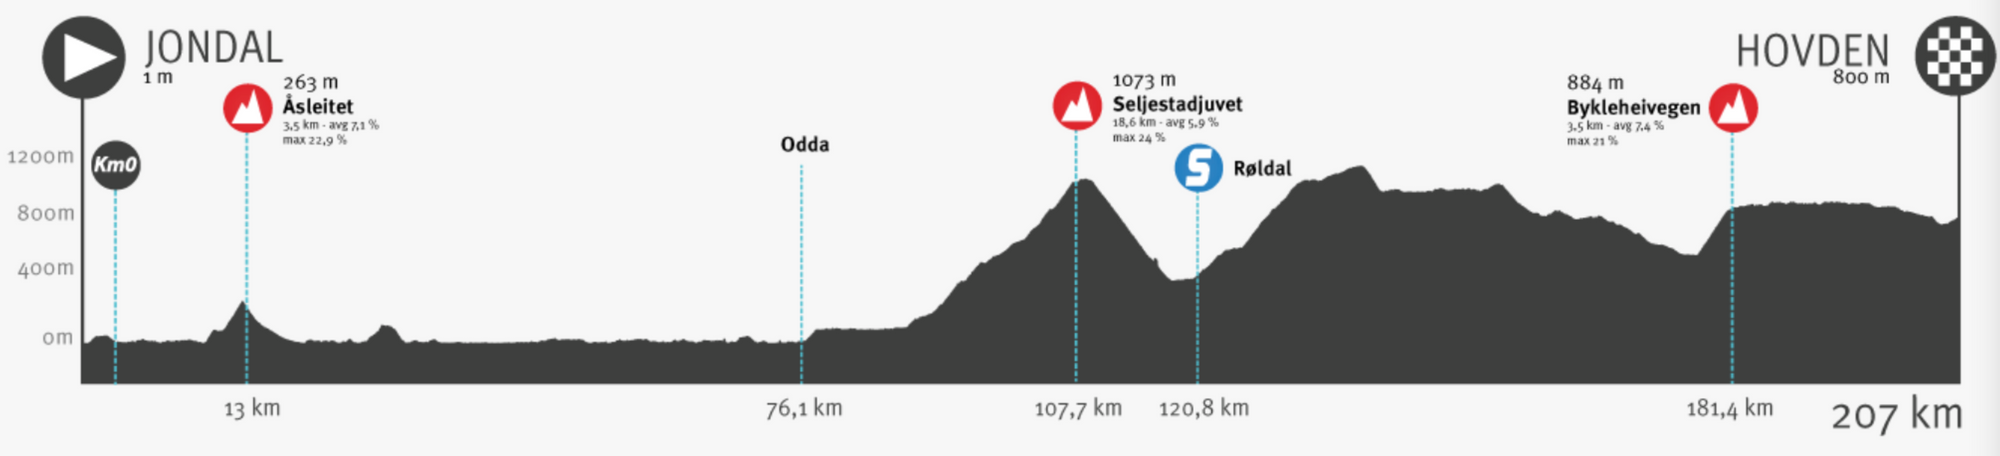 tour of norway odds